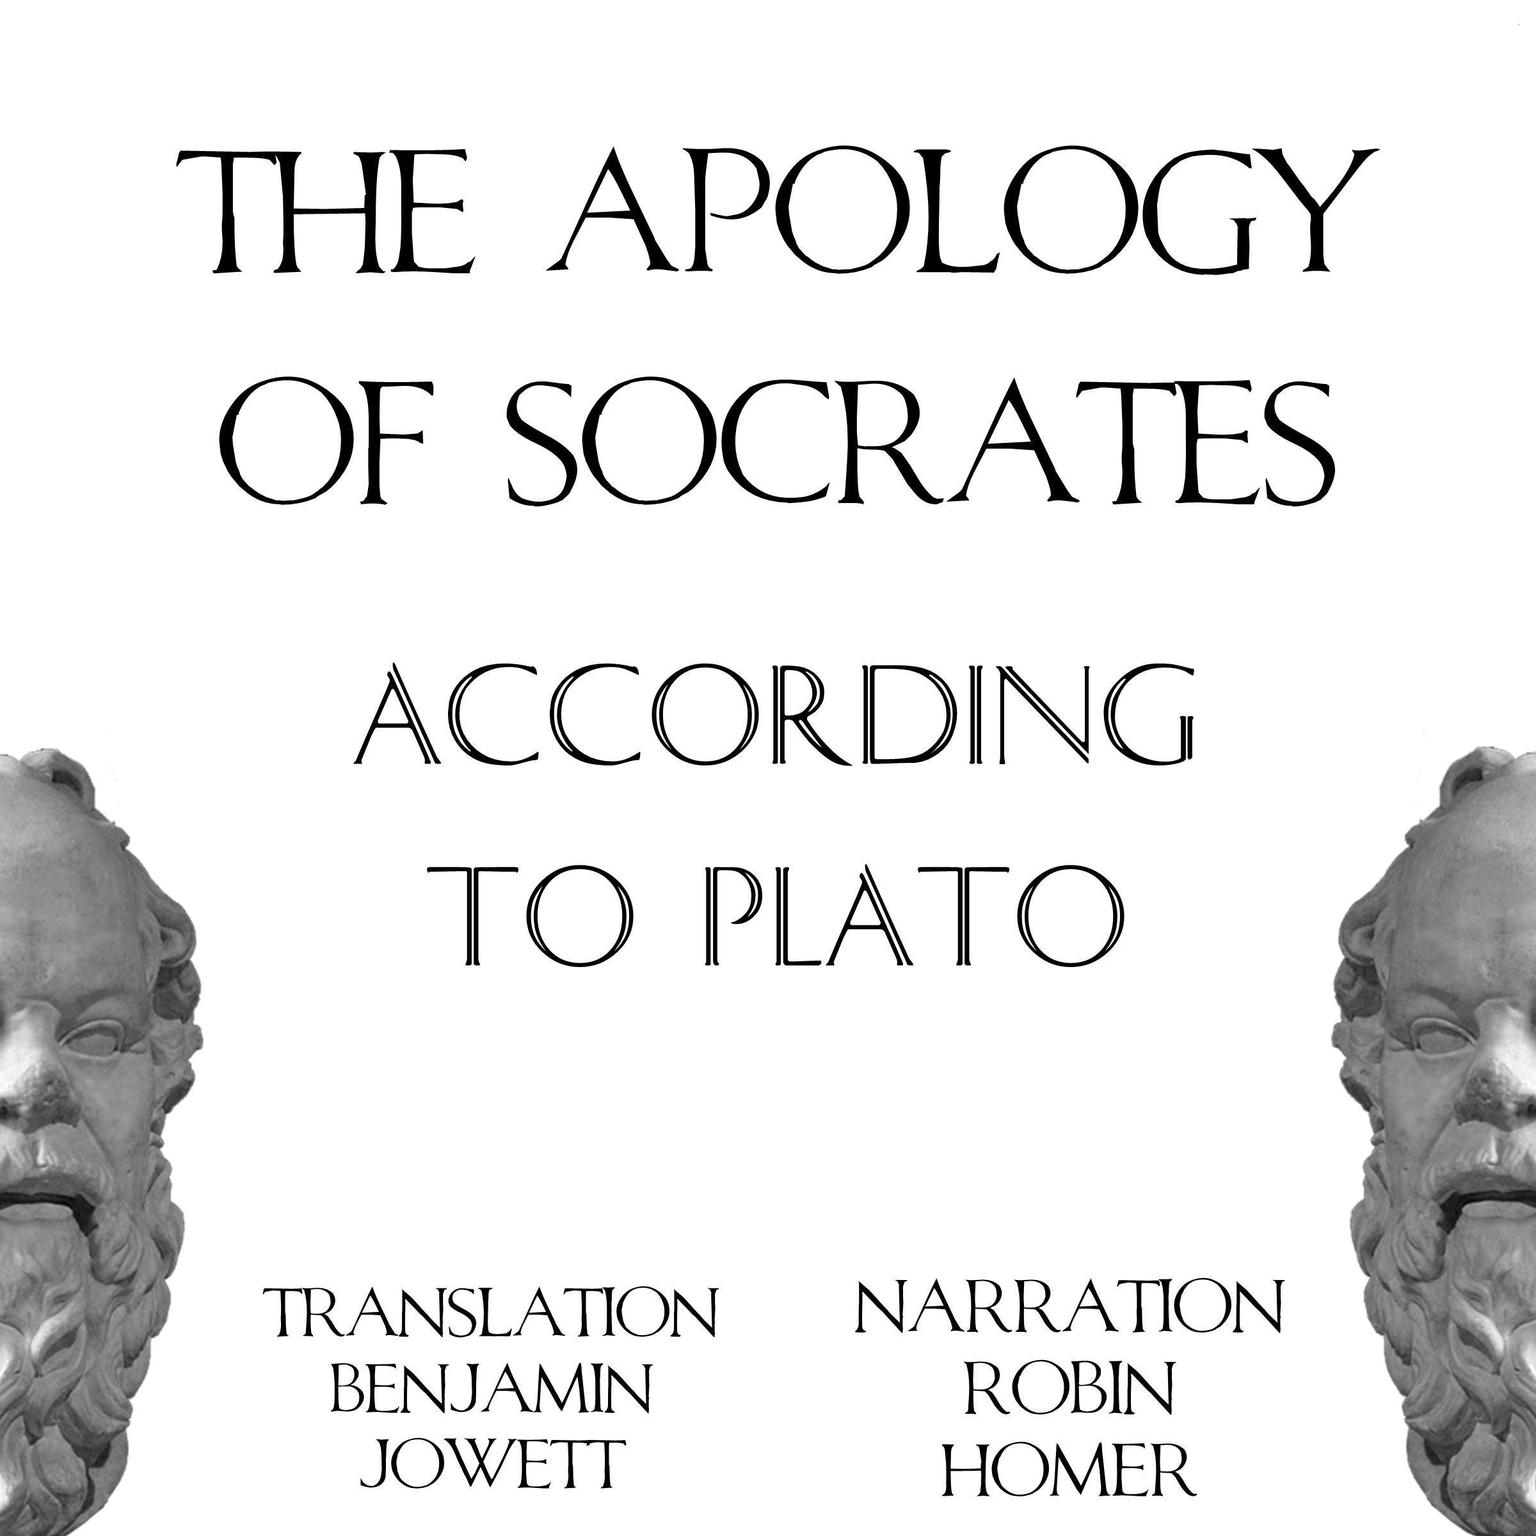 The Apology of Socrates According to Plato Audiobook, by Plato